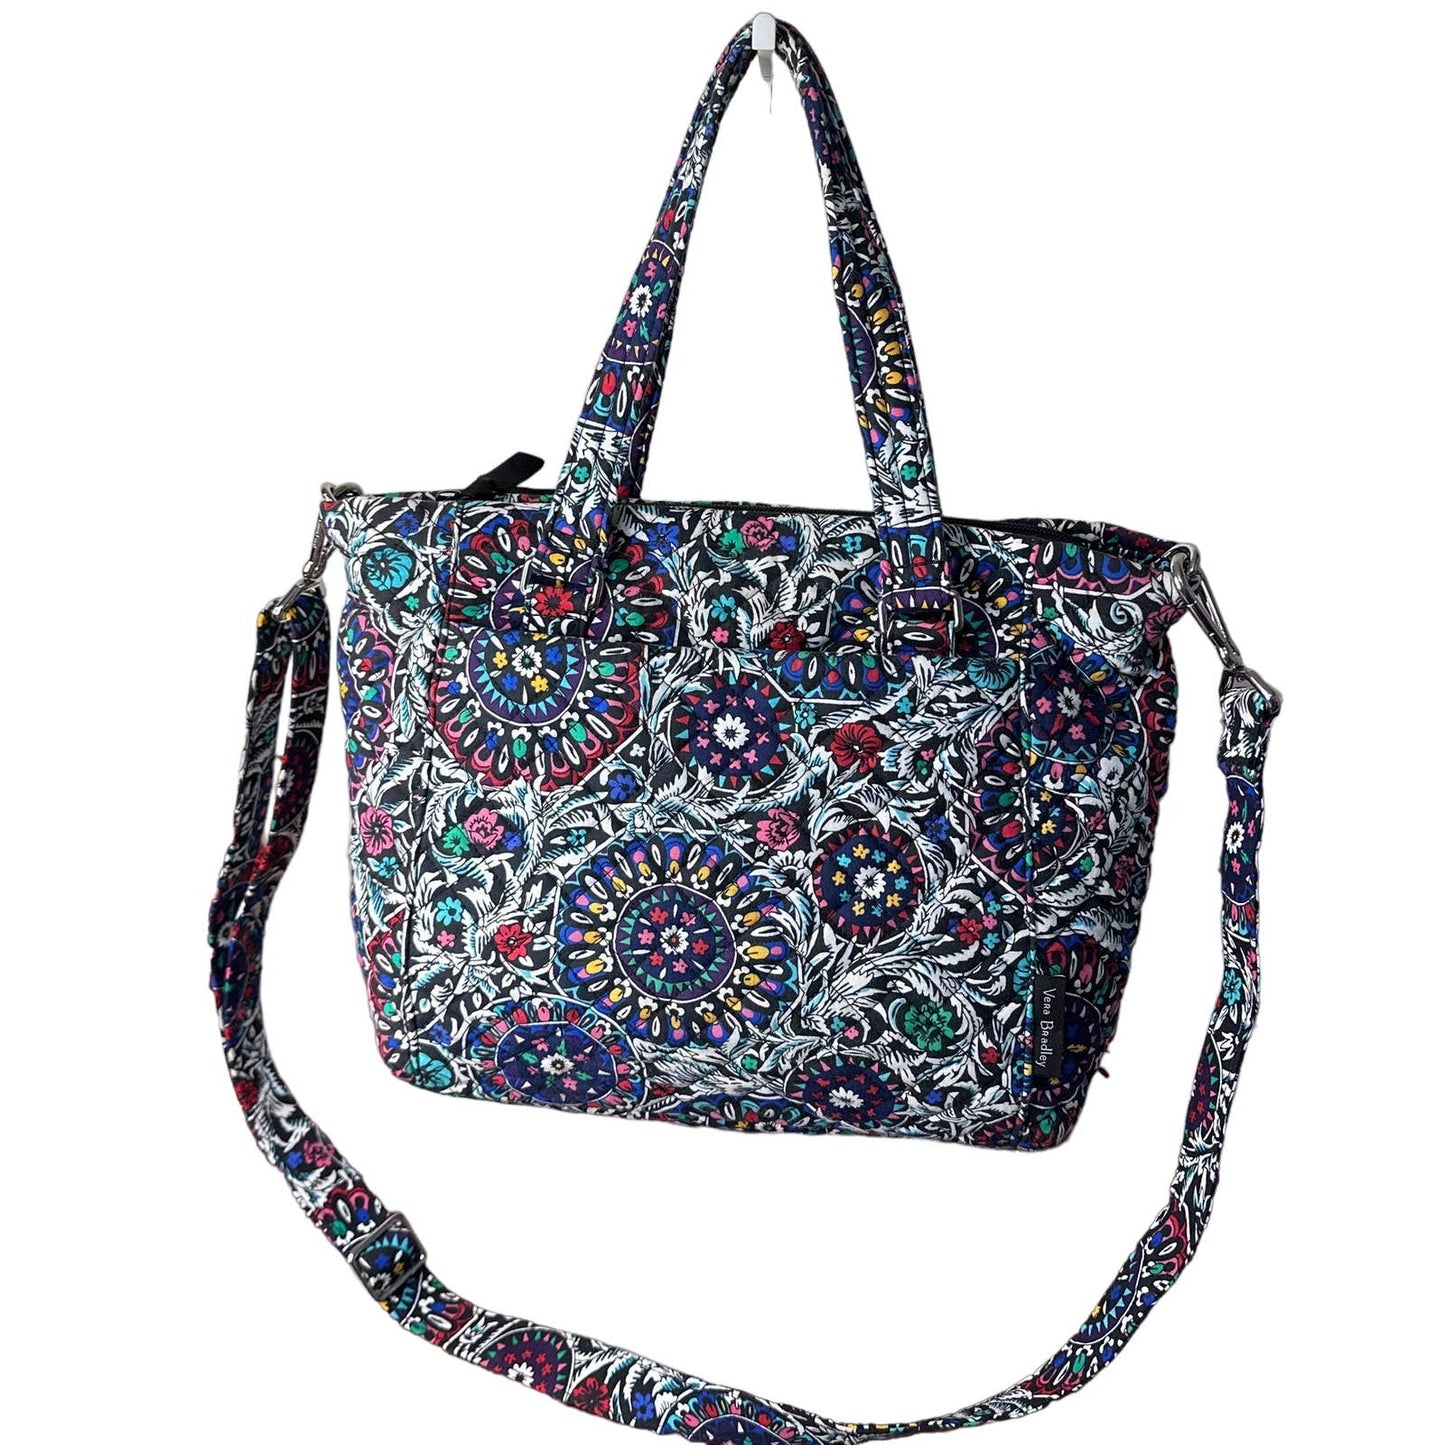 VERA BRADLEY Recycled Cotton Multi-strap Shoulder Stained Glass Medallion